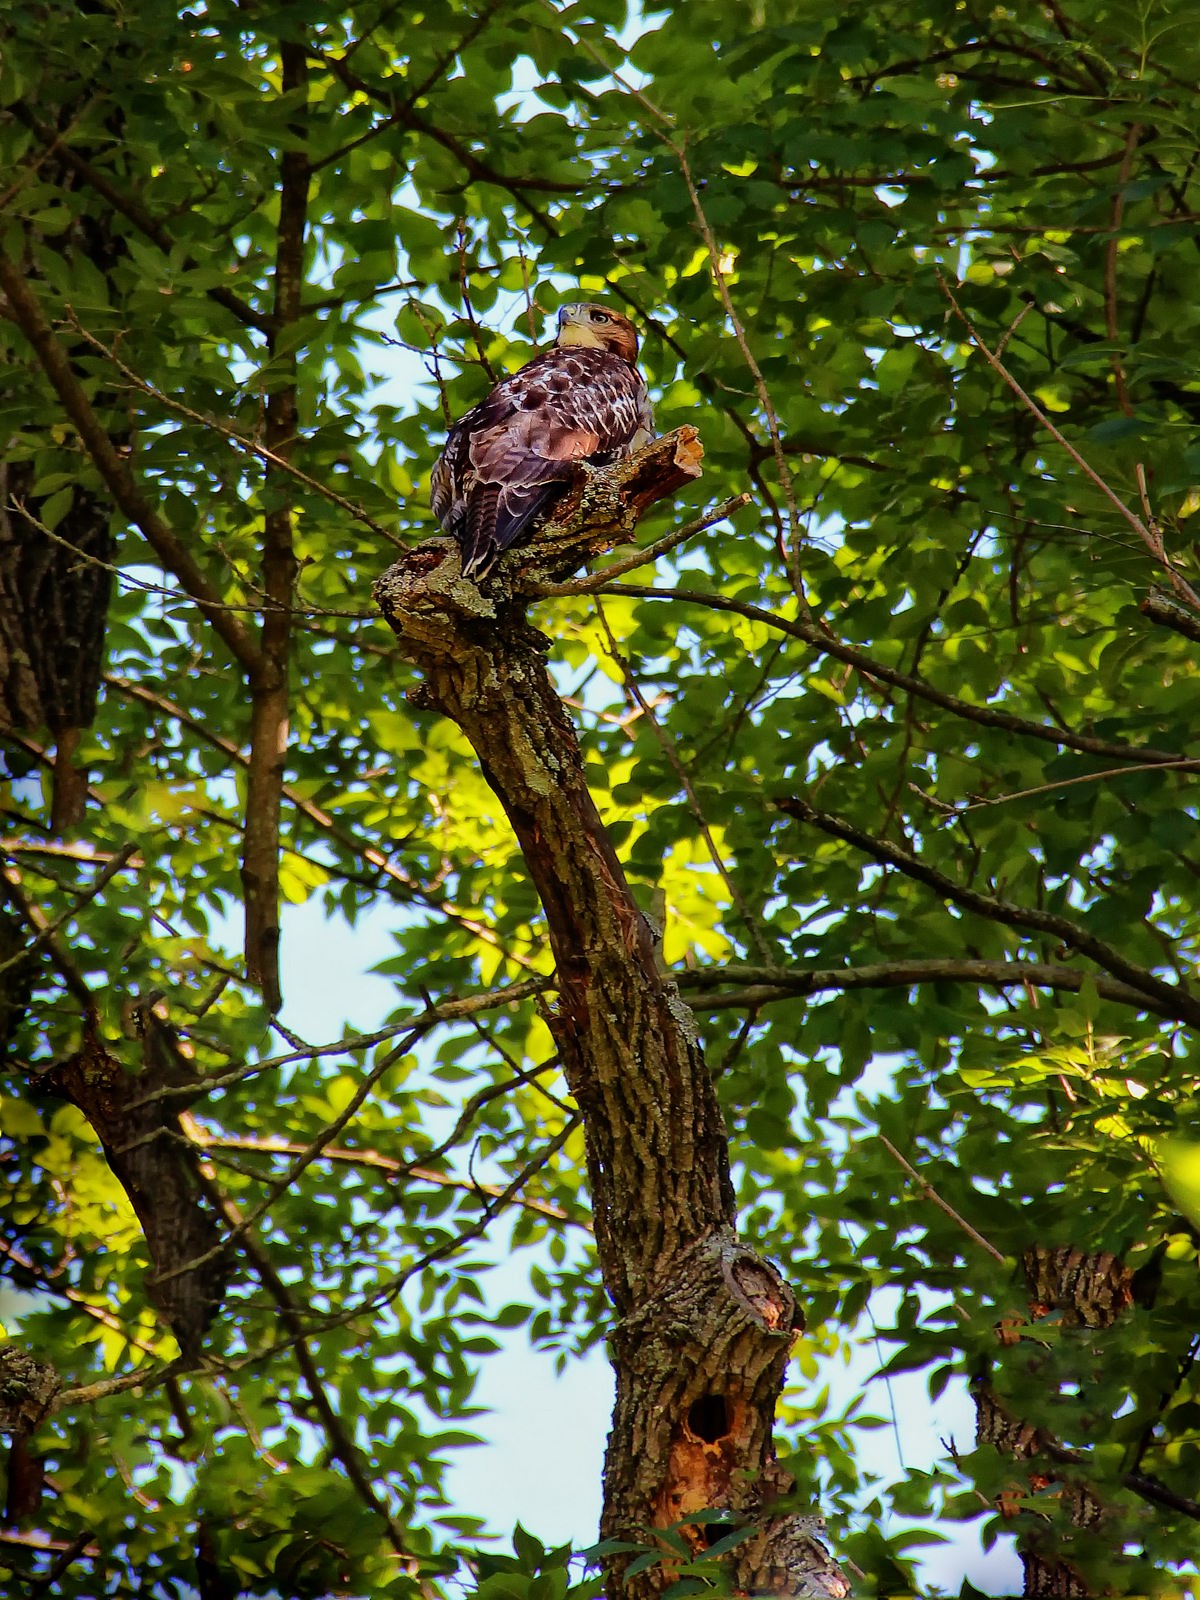 A young Red Tailed Hawk waited anxiously for mom to bring lunch.